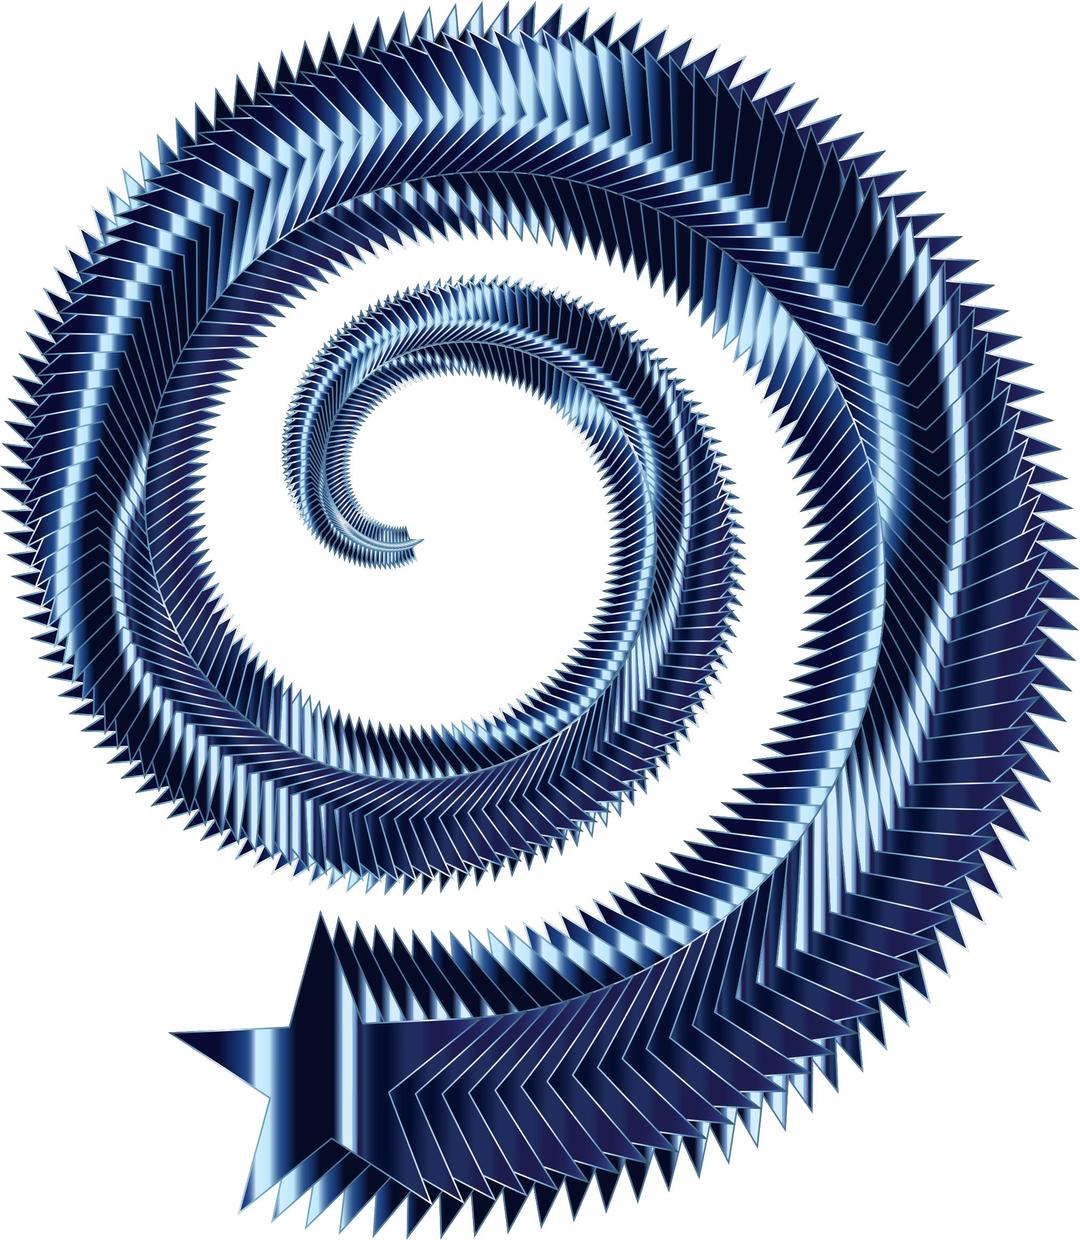 Millipede Of Your Nightmares png transparent